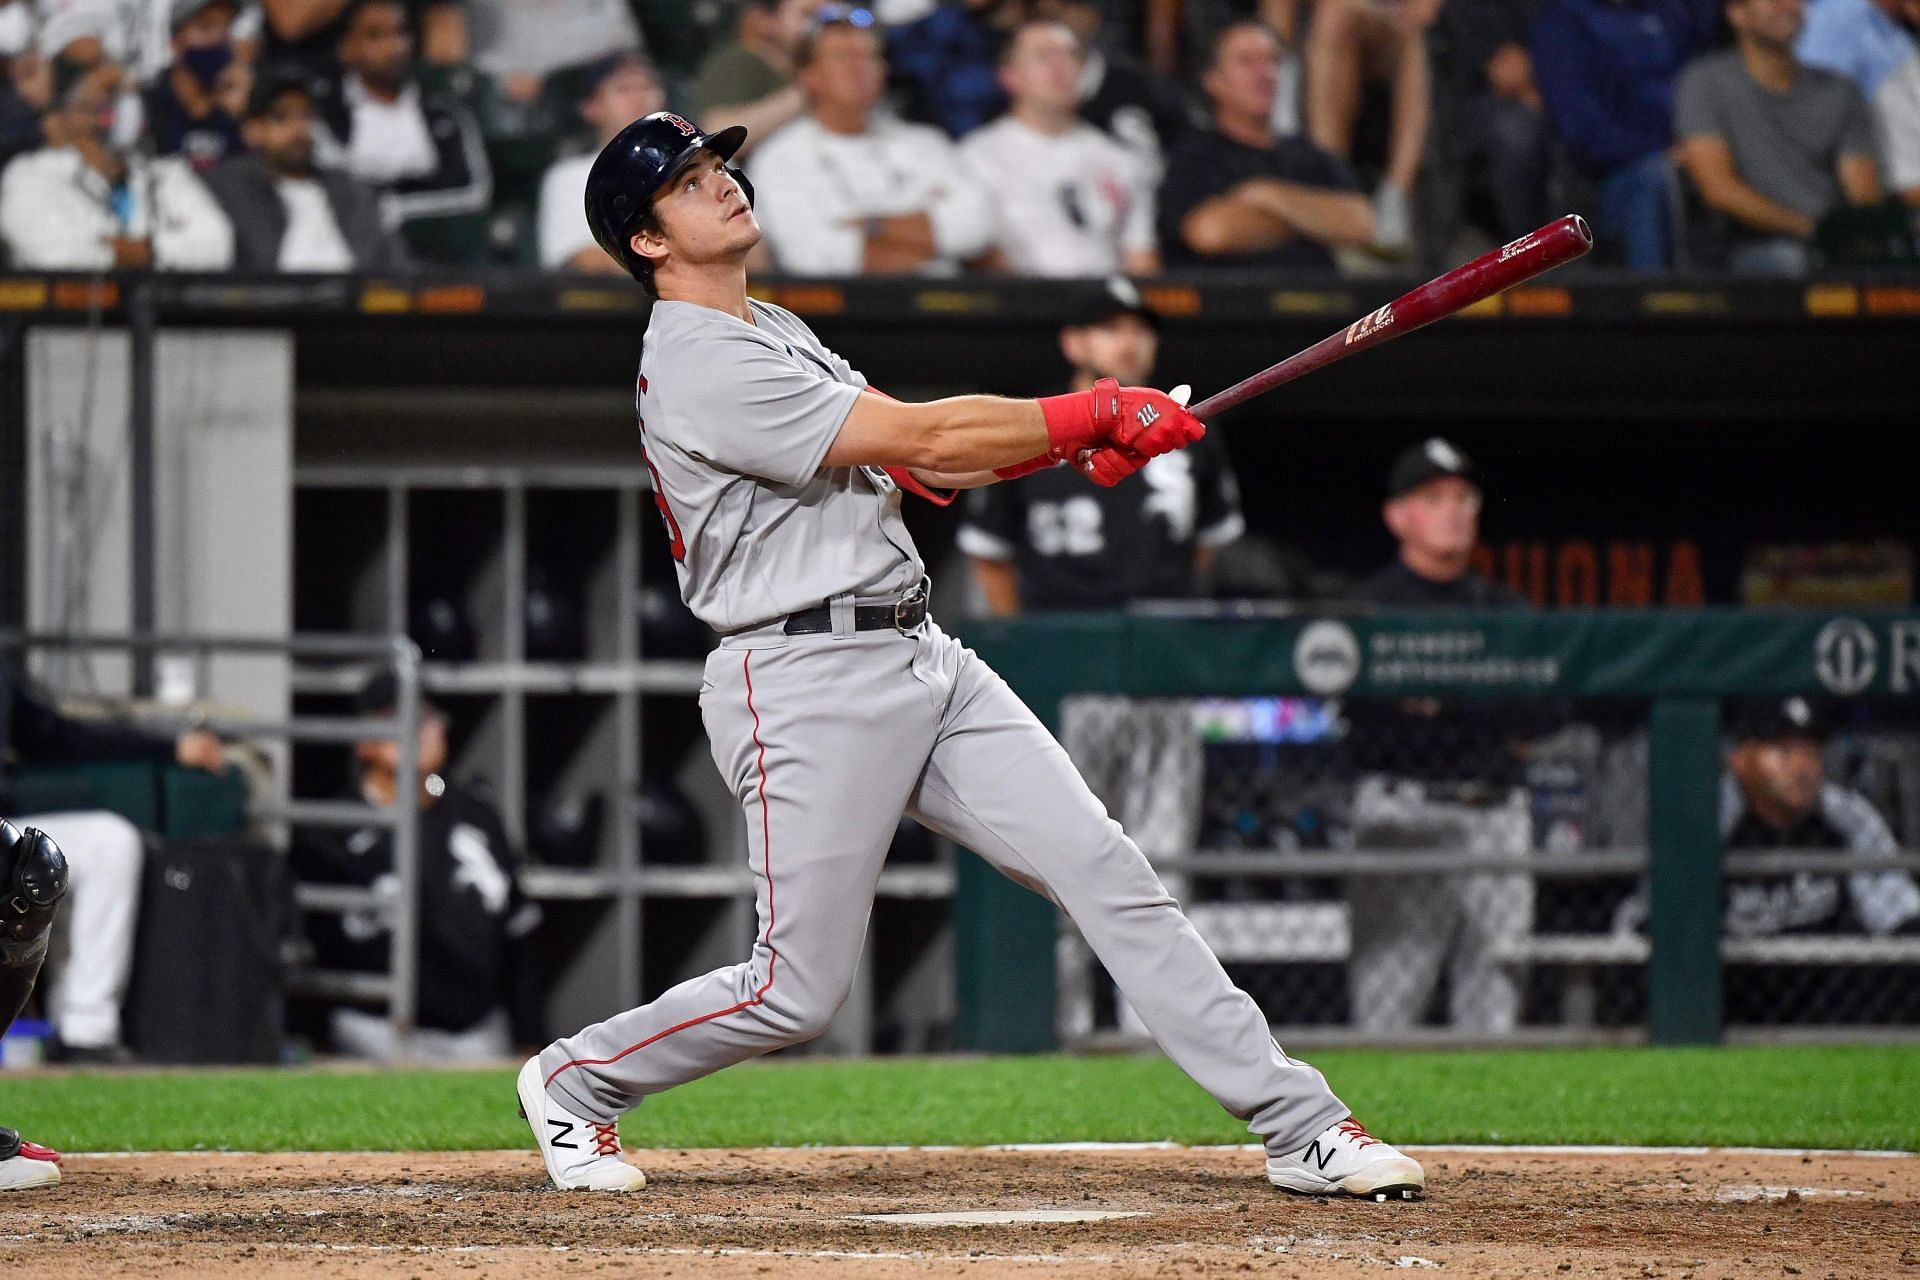 5 breakout candidates for the 2022 MLB season